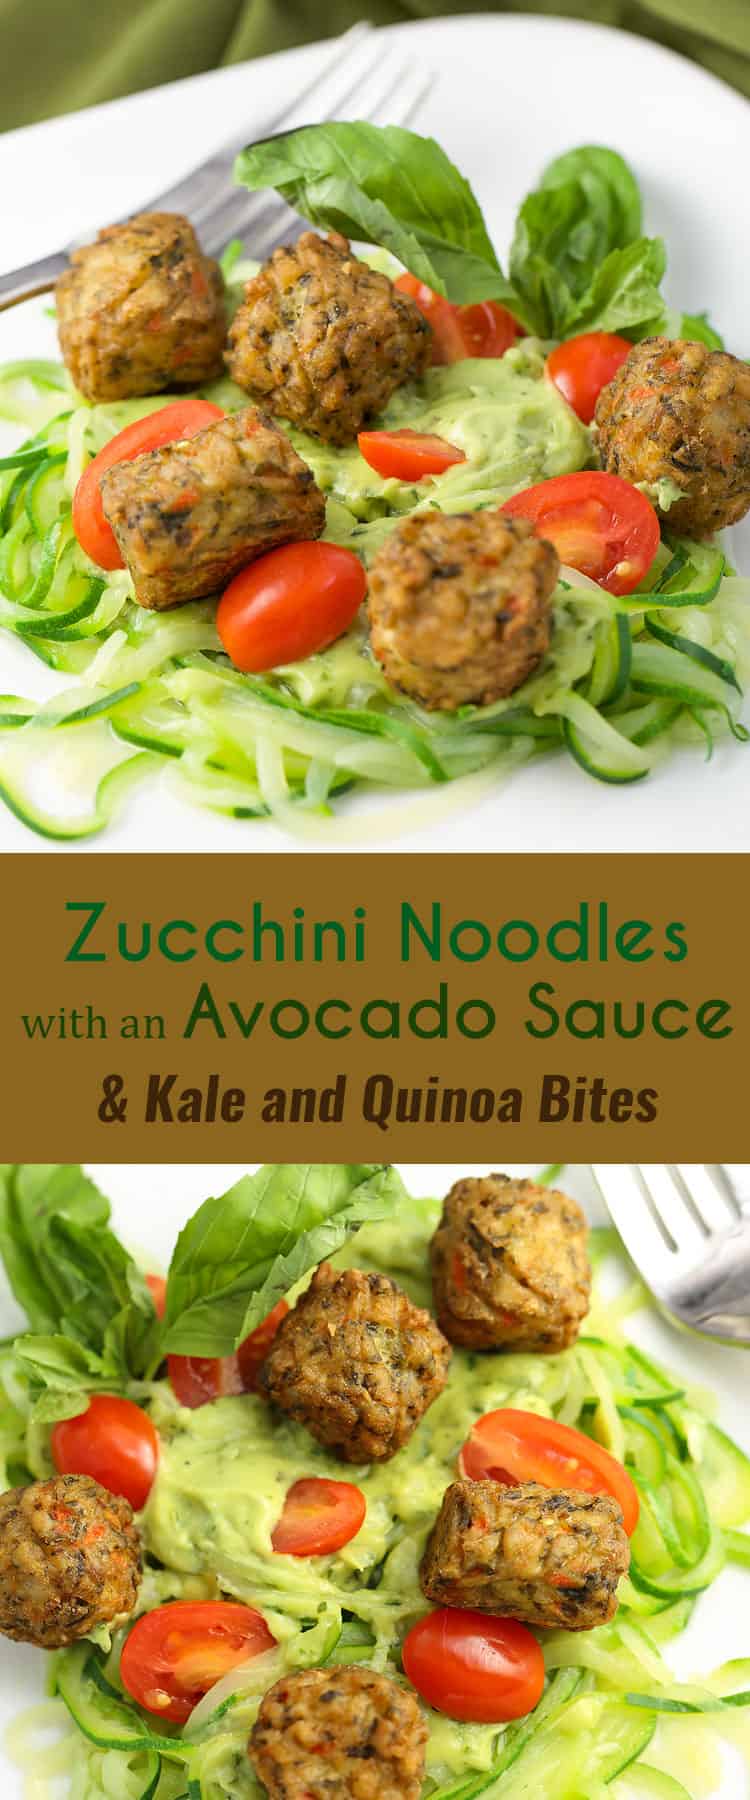 Zucchini Noodles with an Avocado Sauce and Kale and Quinoa Bites